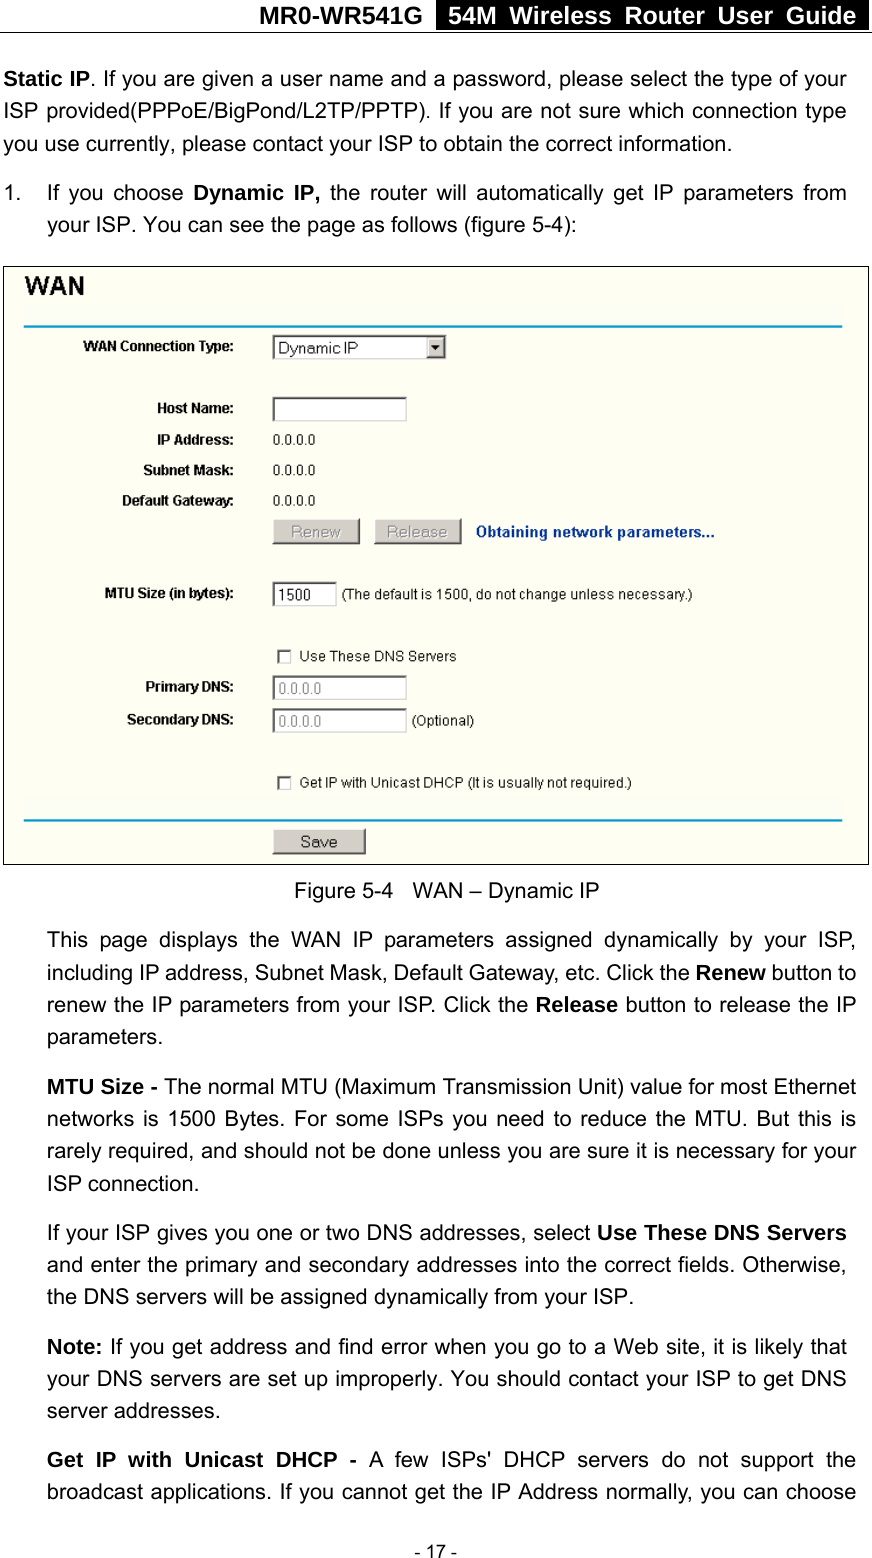 MR0-WR541G   54M Wireless Router User Guide  Static IP. If you are given a user name and a password, please select the type of your ISP provided(PPPoE/BigPond/L2TP/PPTP). If you are not sure which connection type you use currently, please contact your ISP to obtain the correct information. 1. If you choose Dynamic IP, the router will automatically get IP parameters from your ISP. You can see the page as follows (figure 5-4):  Figure 5-4  WAN – Dynamic IP This page displays the WAN IP parameters assigned dynamically by your ISP, including IP address, Subnet Mask, Default Gateway, etc. Click the Renew button to renew the IP parameters from your ISP. Click the Release button to release the IP parameters. MTU Size - The normal MTU (Maximum Transmission Unit) value for most Ethernet networks is 1500 Bytes. For some ISPs you need to reduce the MTU. But this is rarely required, and should not be done unless you are sure it is necessary for your ISP connection. If your ISP gives you one or two DNS addresses, select Use These DNS Servers and enter the primary and secondary addresses into the correct fields. Otherwise, the DNS servers will be assigned dynamically from your ISP.  Note: If you get address and find error when you go to a Web site, it is likely that your DNS servers are set up improperly. You should contact your ISP to get DNS server addresses.   Get IP with Unicast DHCP - A few ISPs&apos; DHCP servers do not support the broadcast applications. If you cannot get the IP Address normally, you can choose  - 17 - 